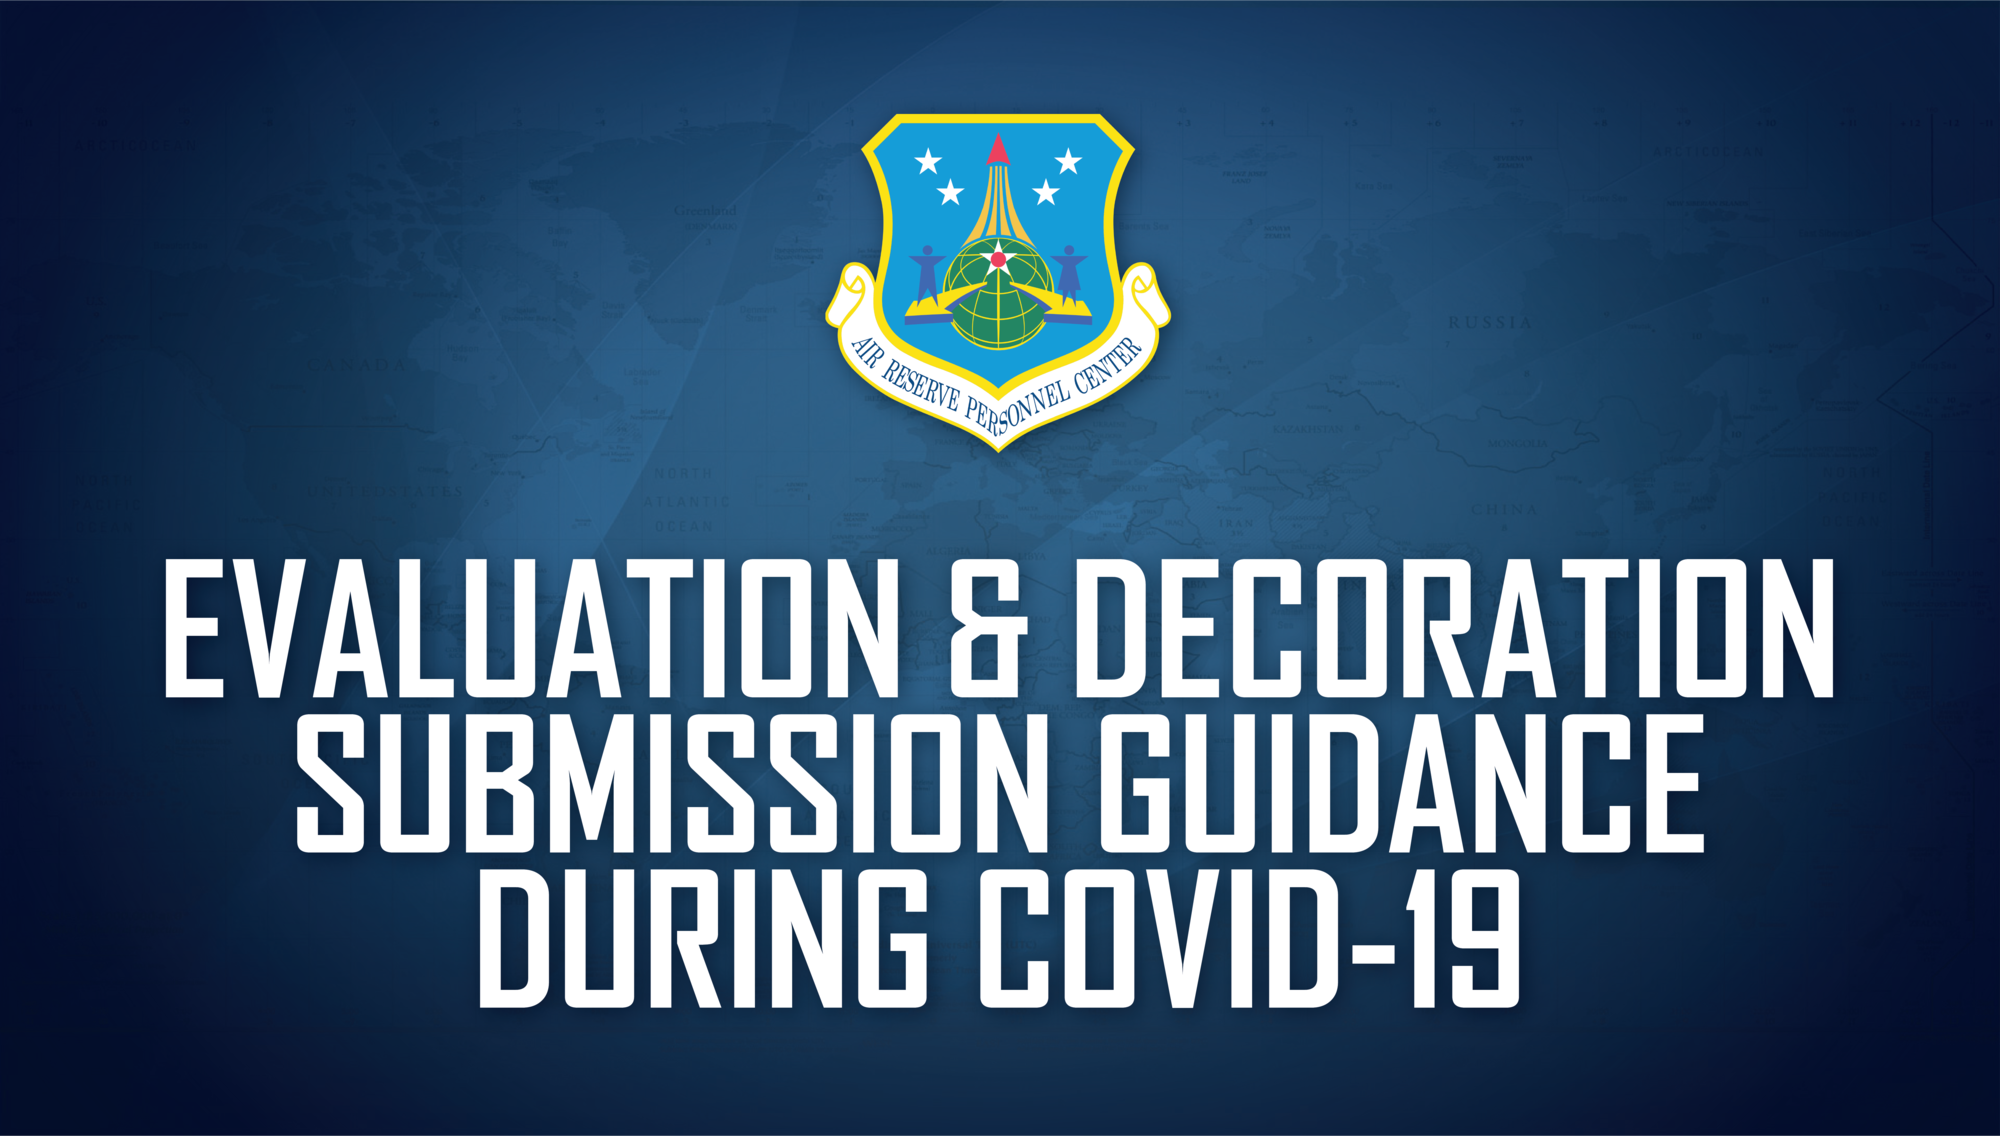 Evaluation & Decoration Submission Guidance During COVID-19 graphic.